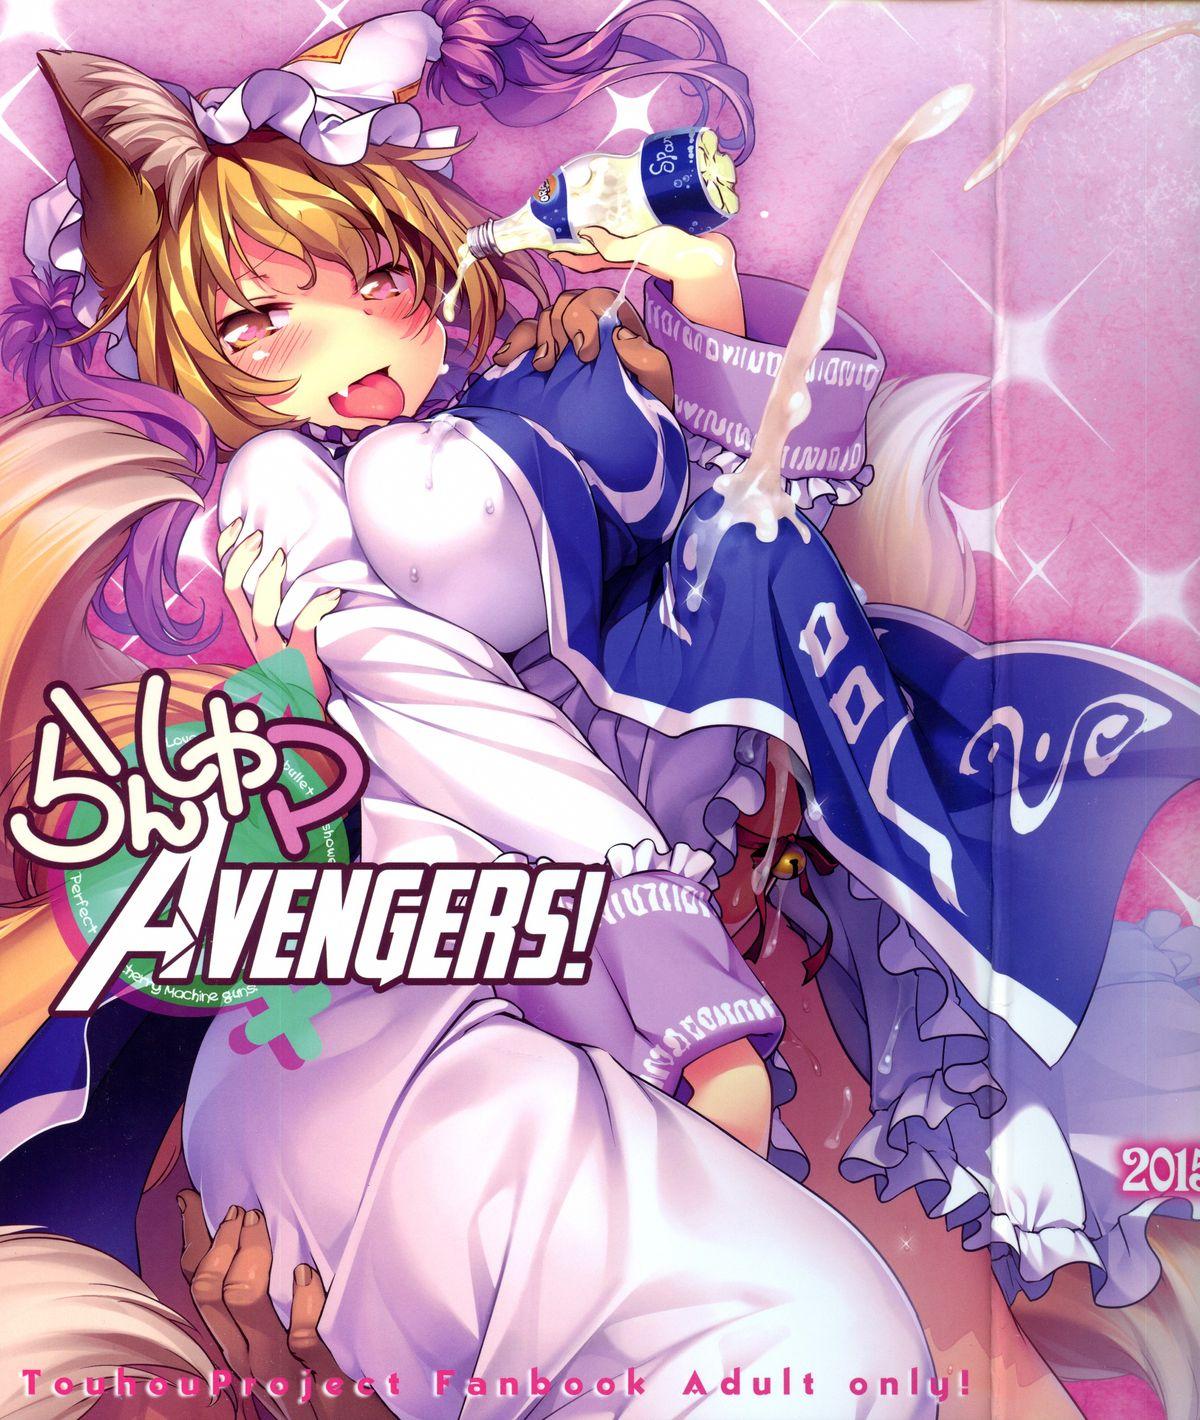 Amateur Asian Ran Shama Avengers! - Touhou project Gay Toys - Page 1